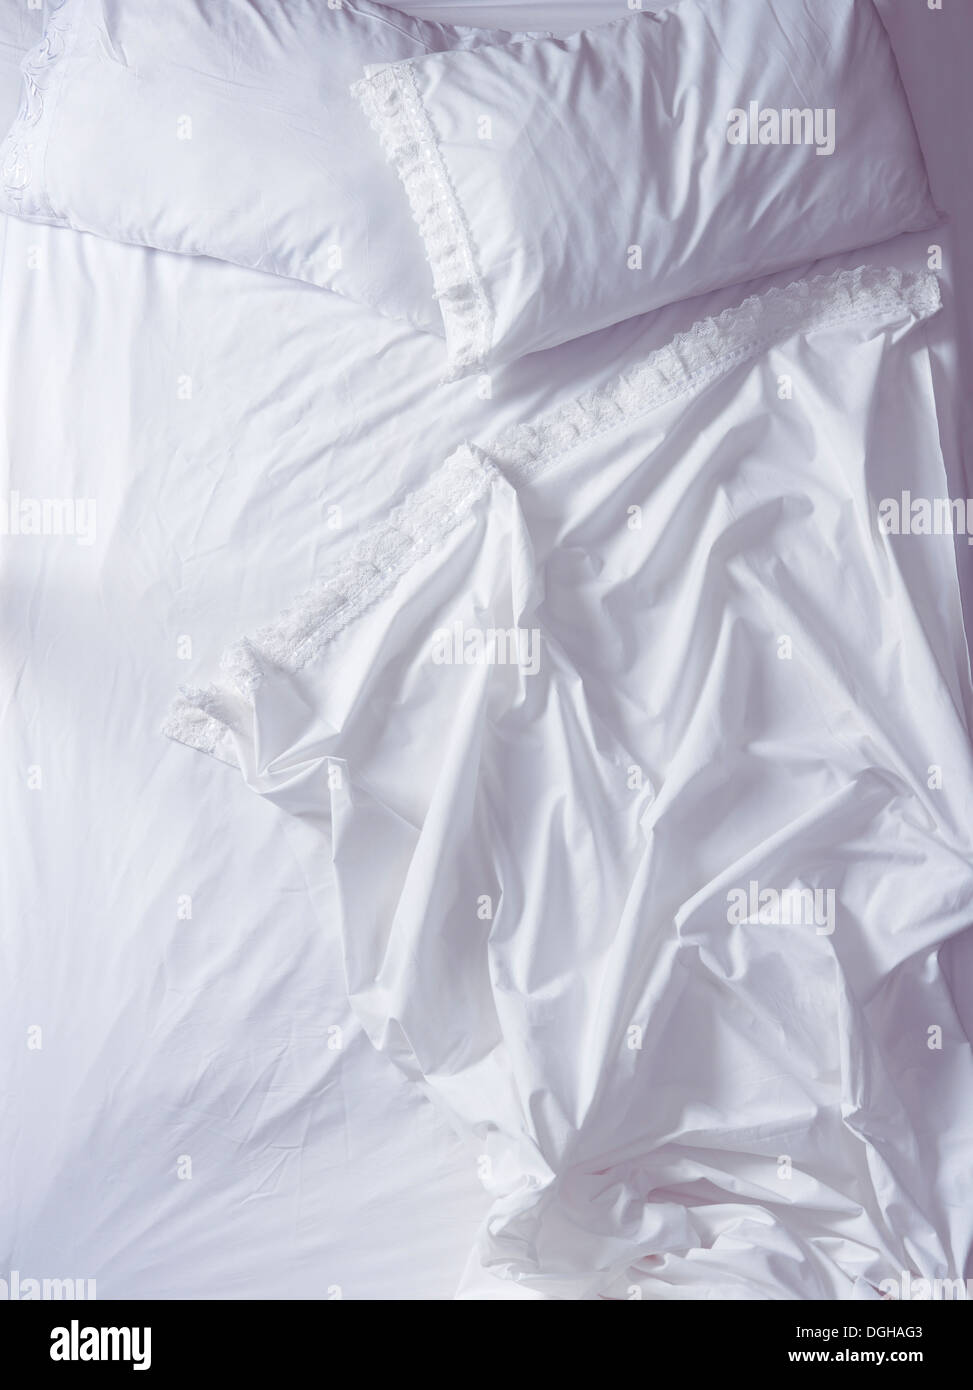 Empty unmade bed with ruffled white sheets in morning light, high angle view. Stock Photo